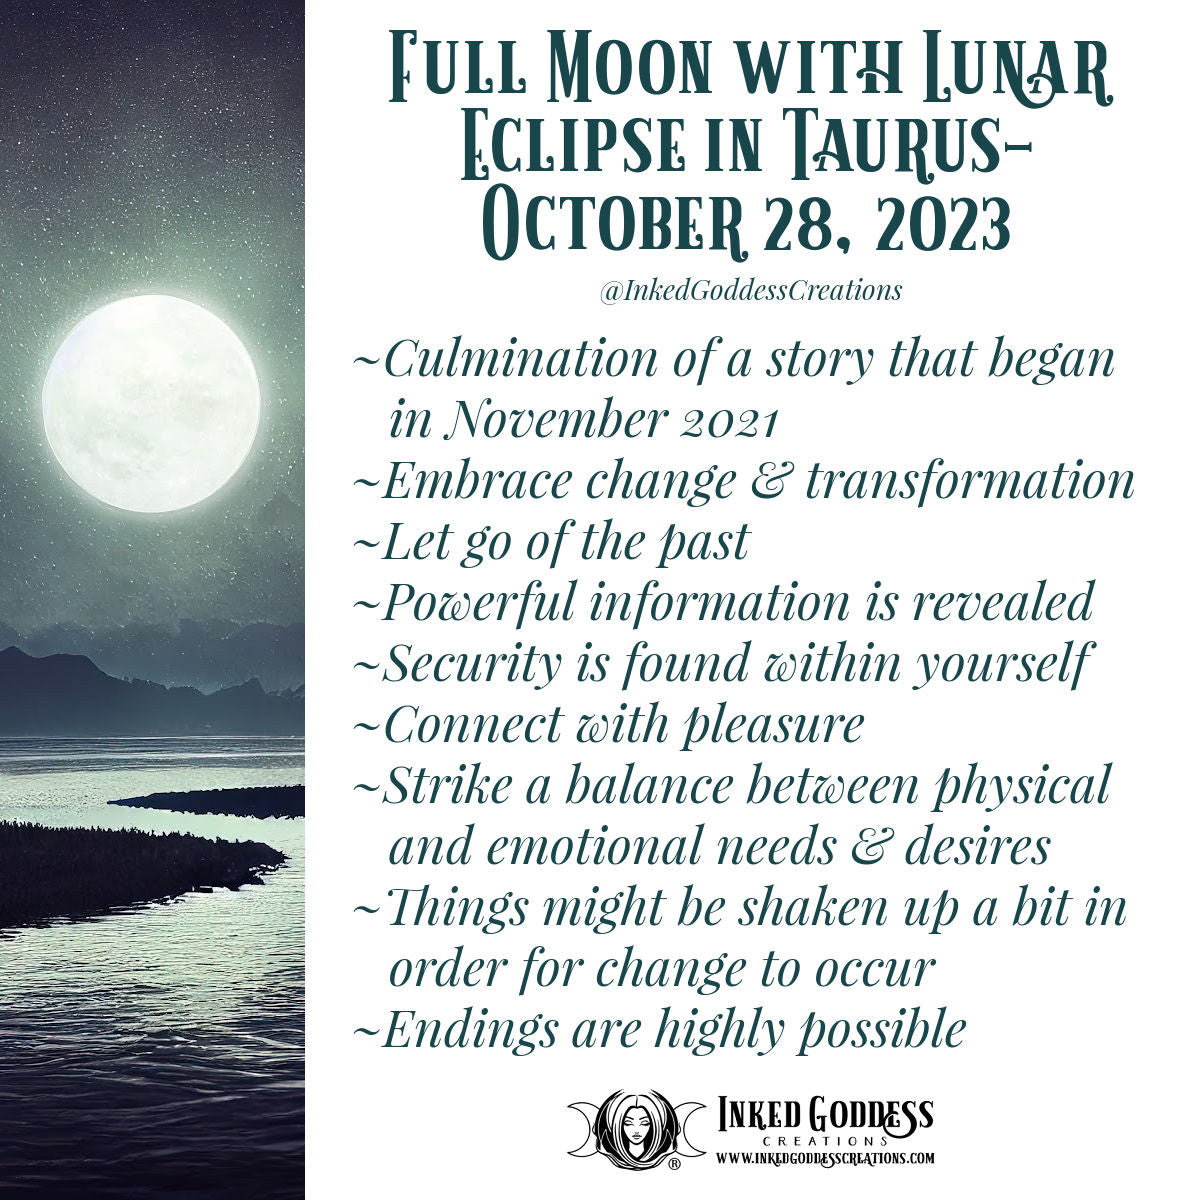 Full Moon with Lunar Eclipse in Taurus- October 28, 2023